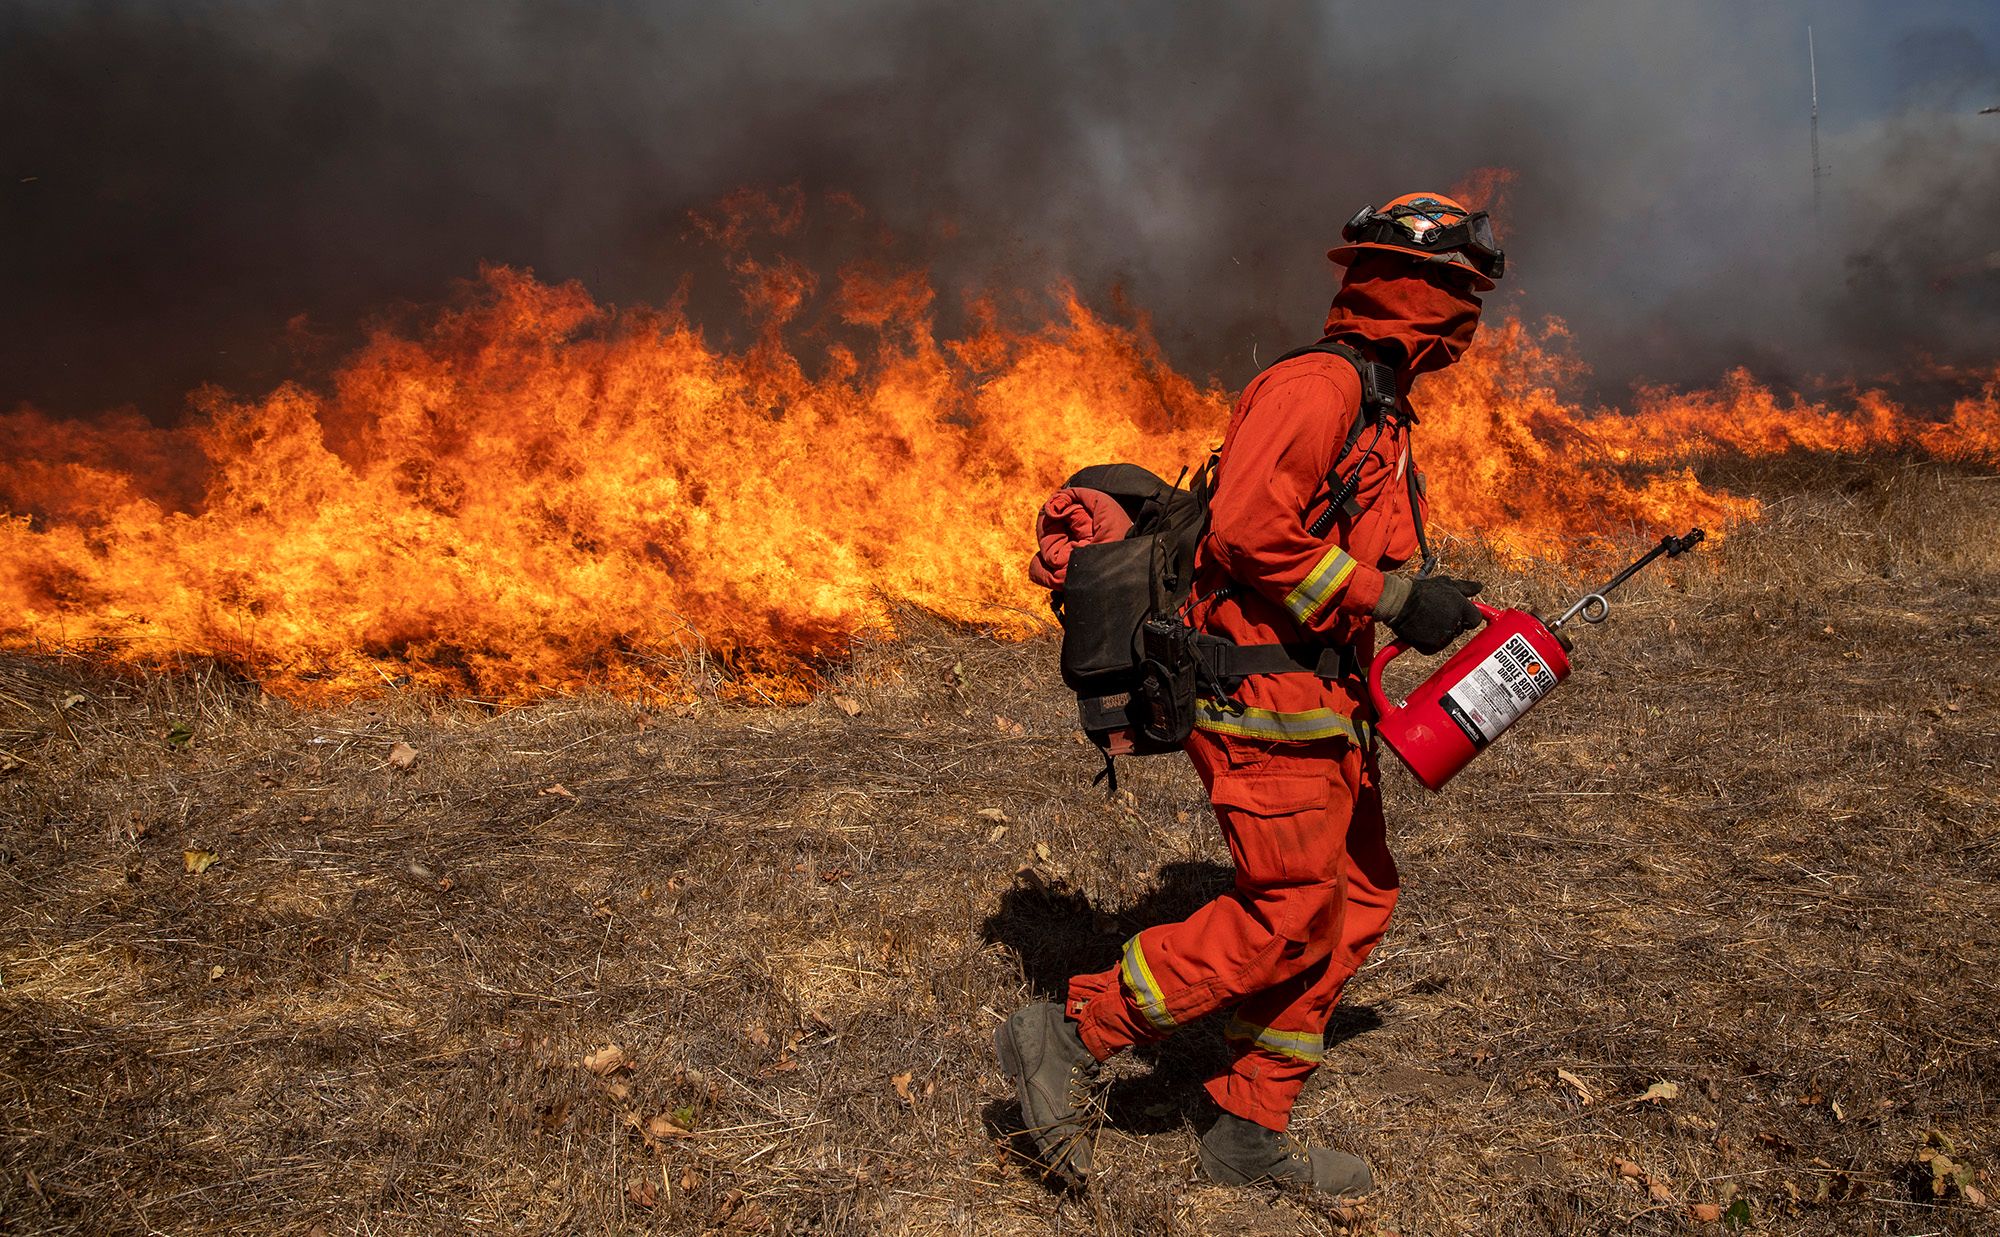 Inmate crews set backfires to heavy brush as firefighters try to keep the 2019 Easy fire from crossing the road. 